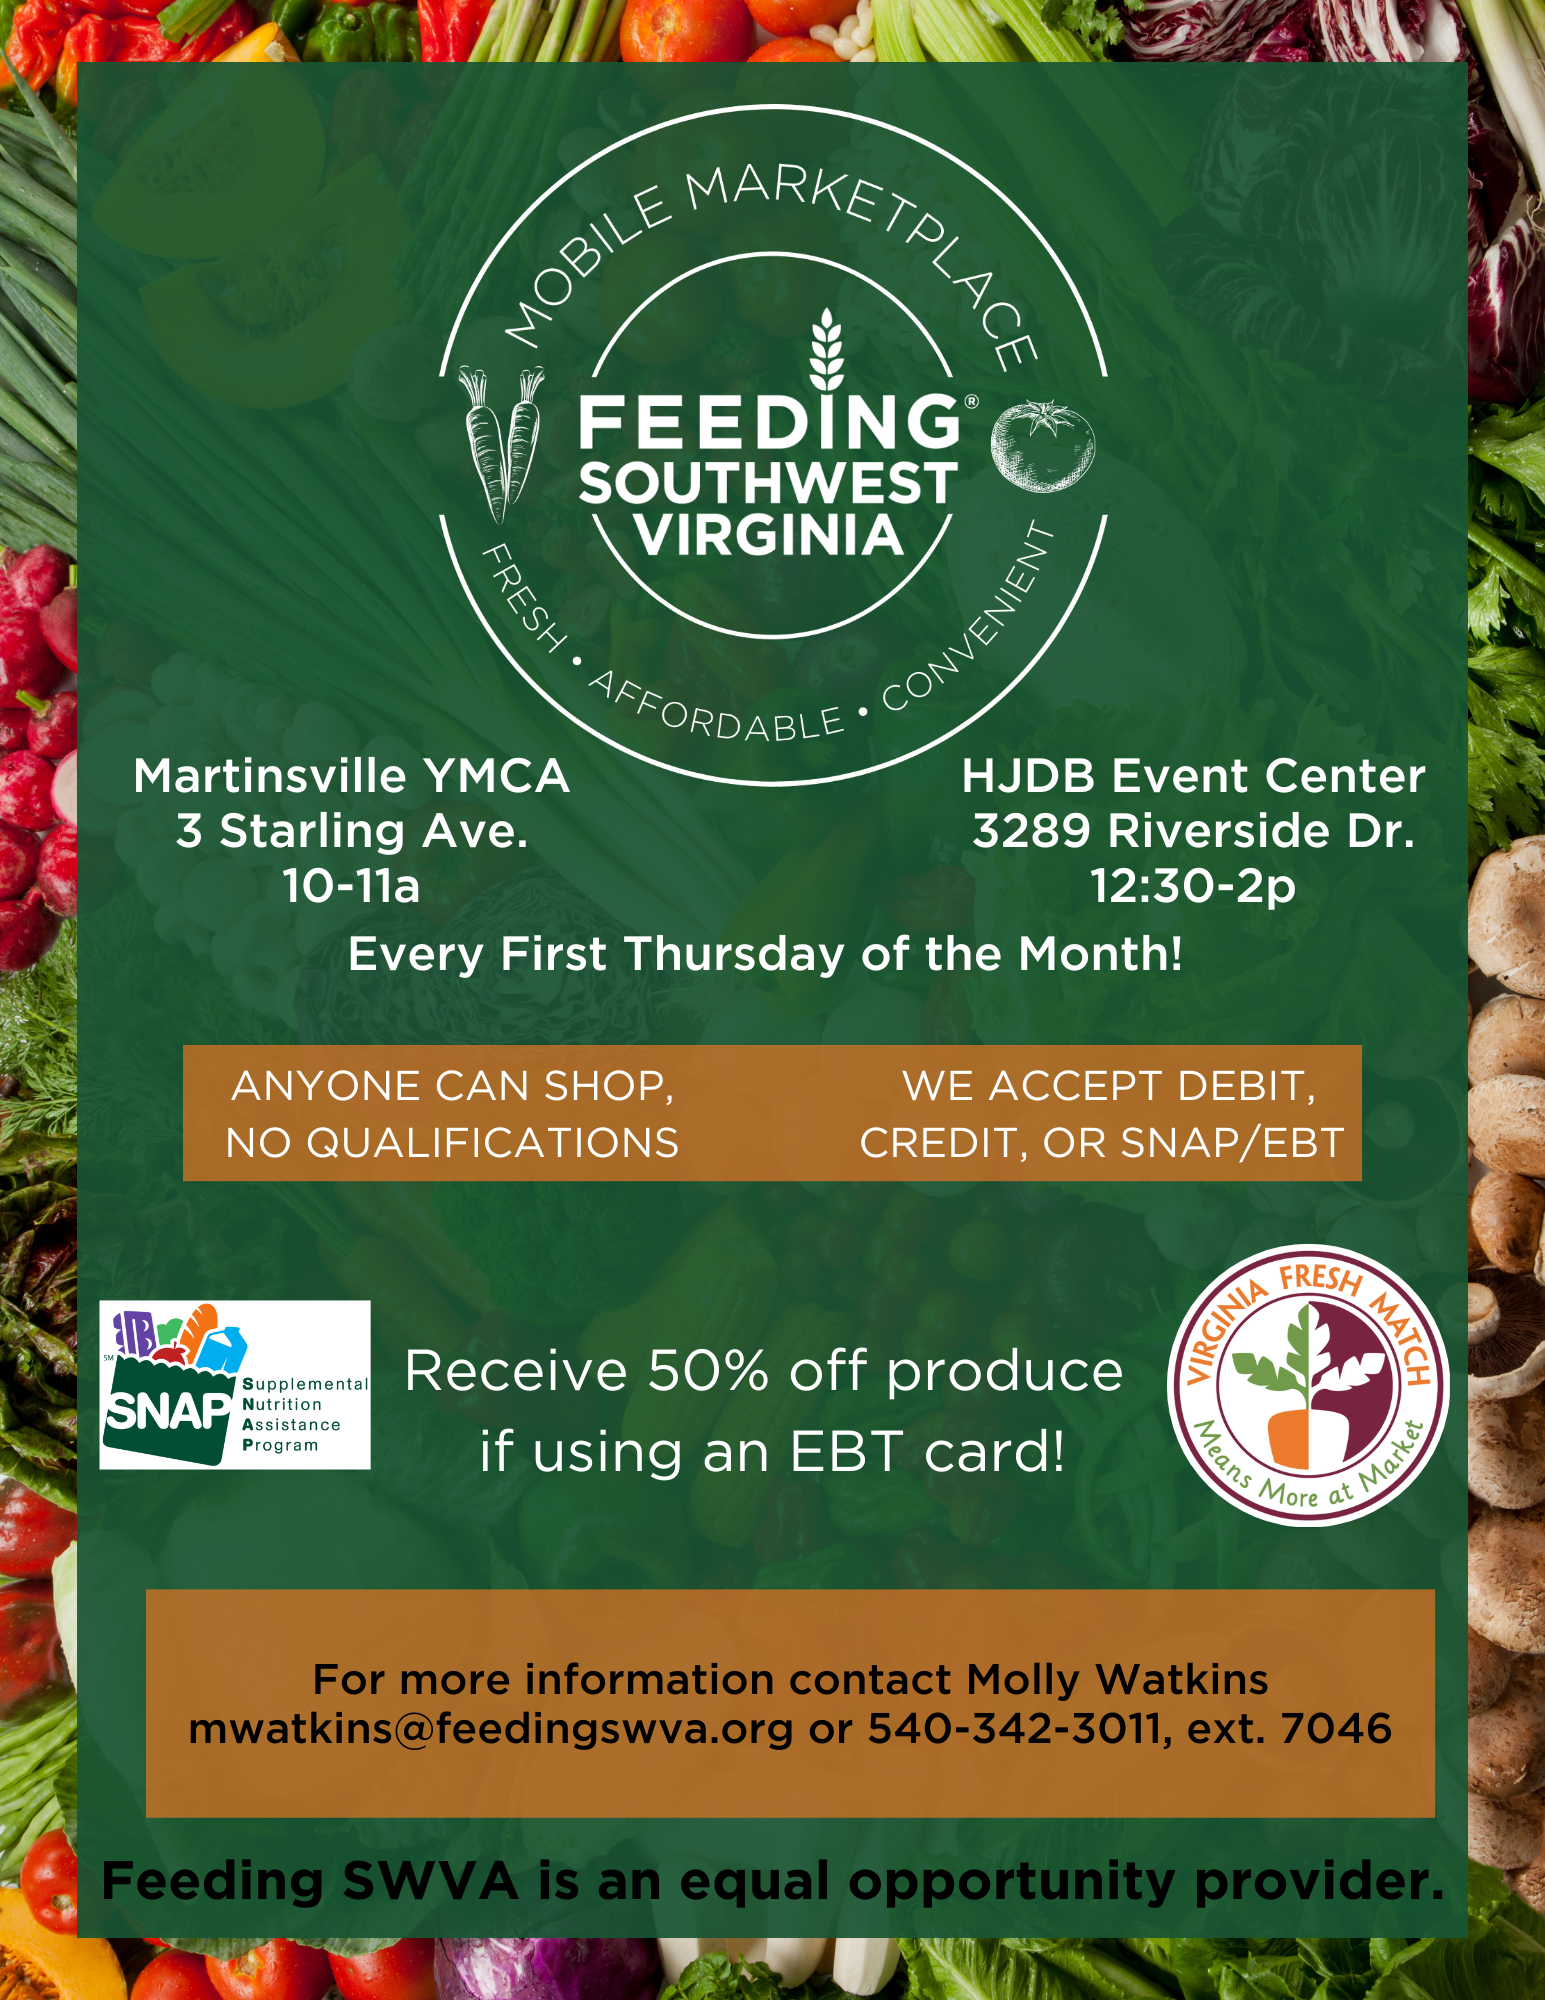 Mobile Marketplace Every first Thursday of the Month @ Martinsville YMCA 3 Starling Ave. from 10-11a or HJDM Event Center  3289 Riverside Dr. 12:30-2p  - Anyone can shop, no qualifications - we accept debit, credit, or SNAP /EBT, receive 50% off produce if using an EBT card.